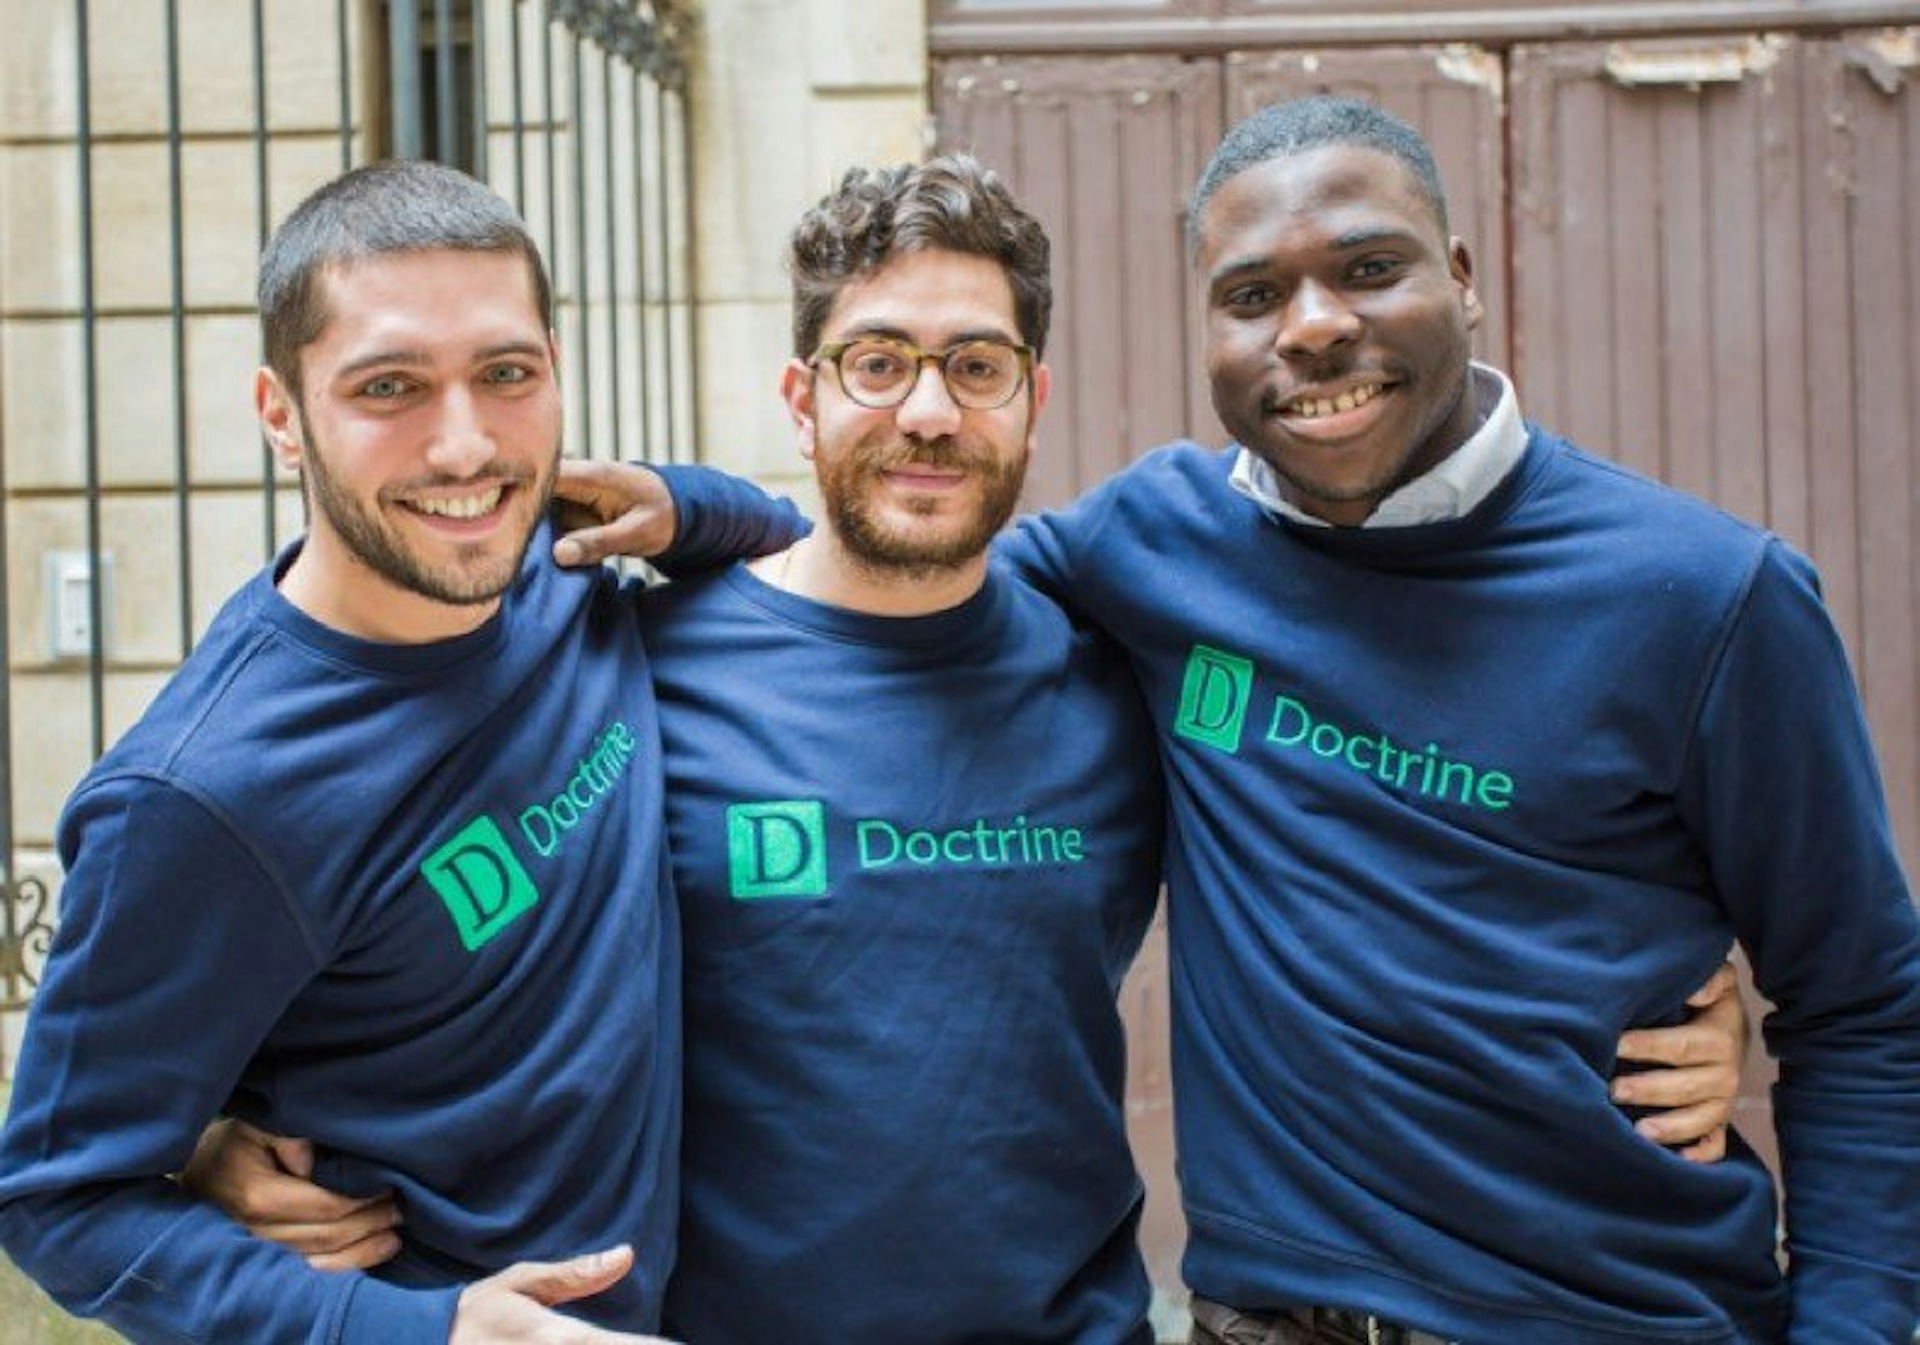 Startups like Doctrine, the new legal search engine that needed to grow its lead volume